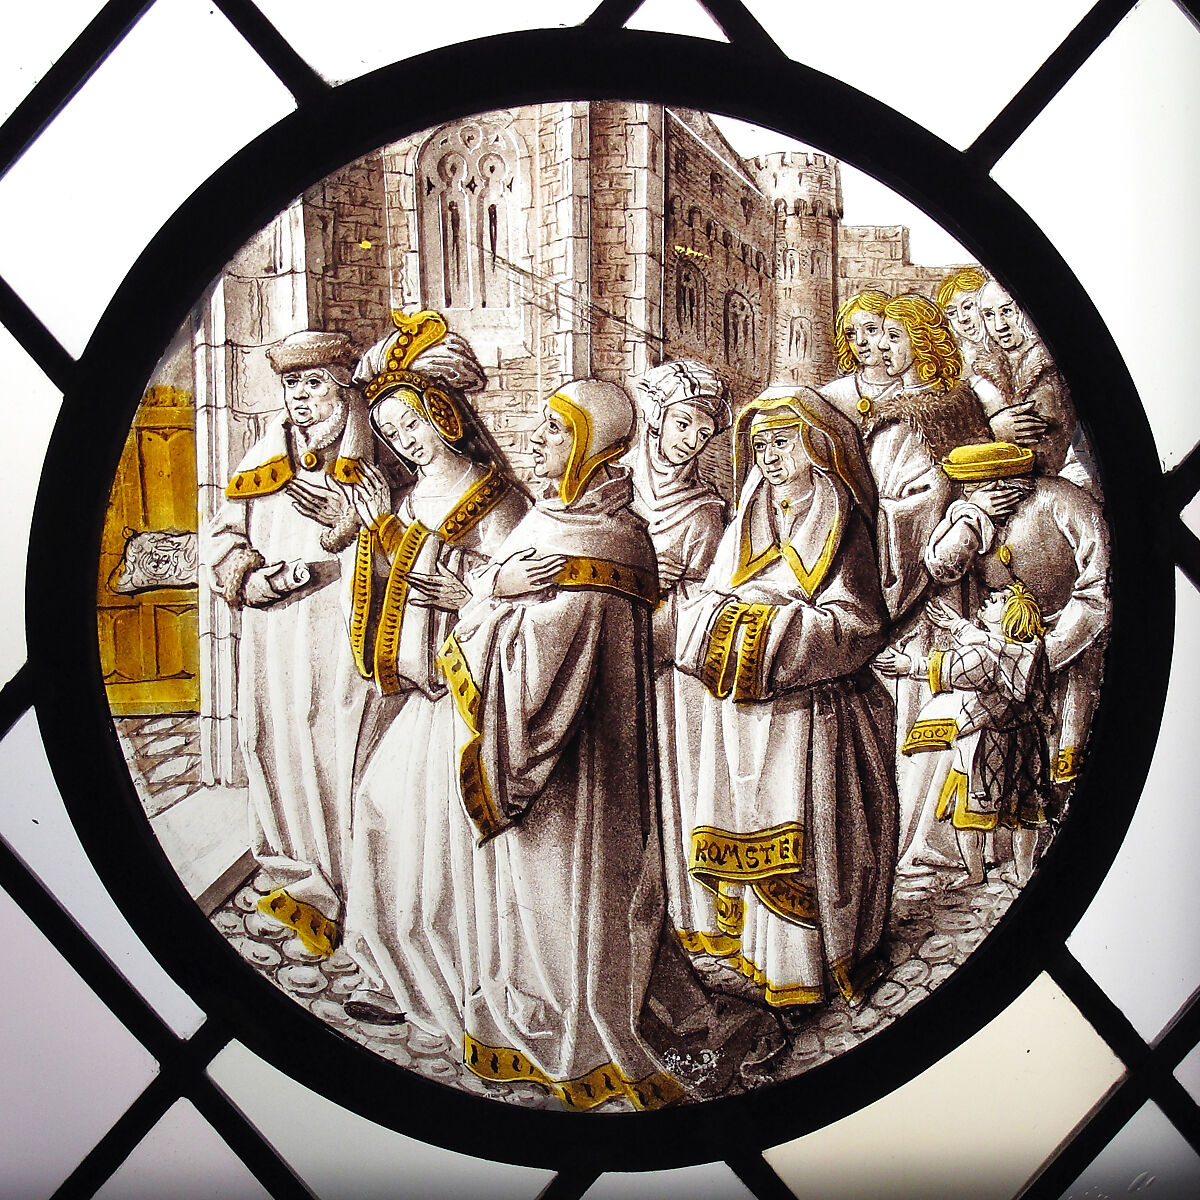 Roundel with Susanna Led to Judgement, Colorless glass, vitreous paint and silver stain, North Netherlandish 